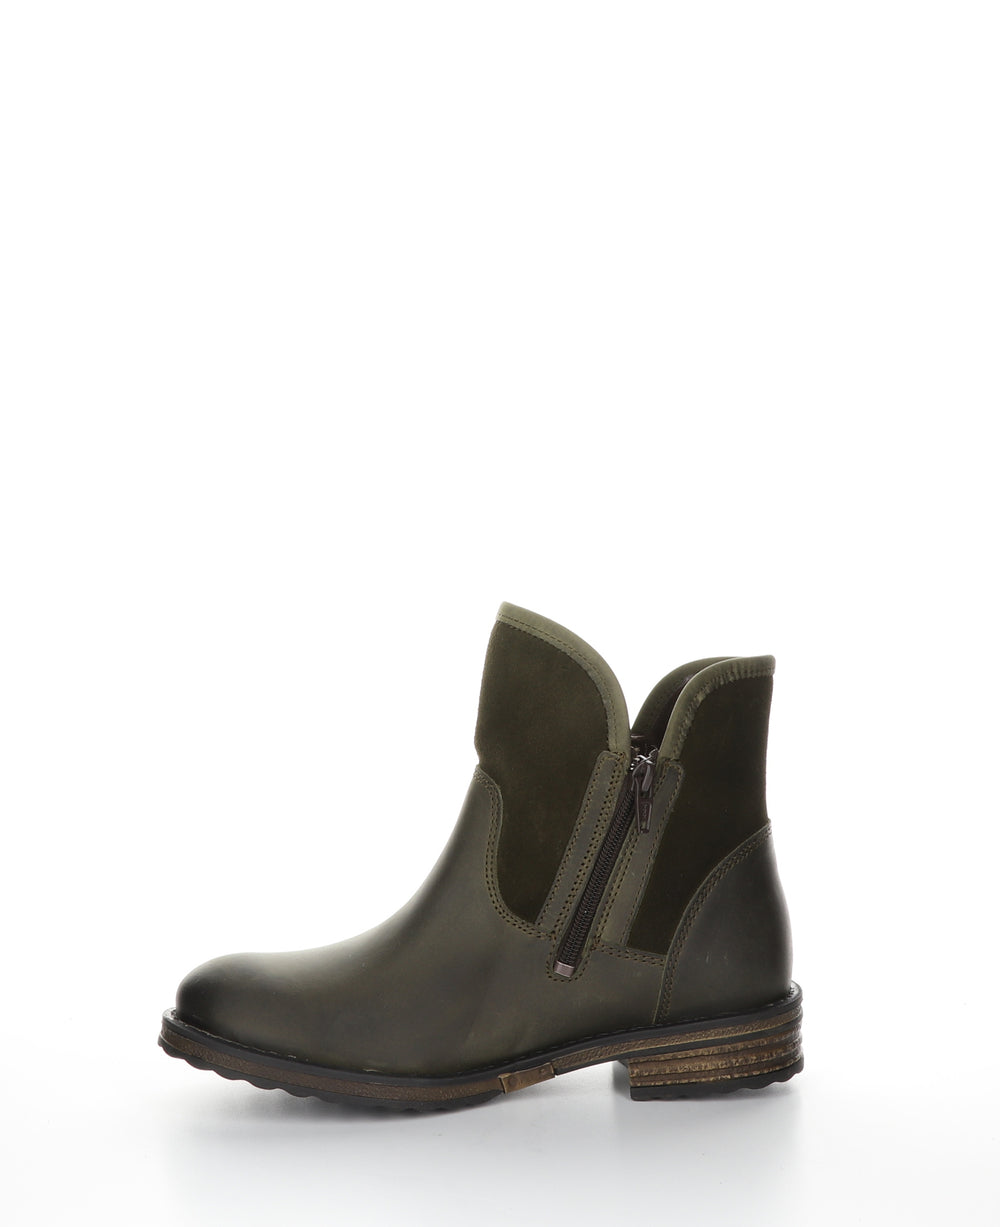 STRIVE Olive Zip Up Ankle Boots